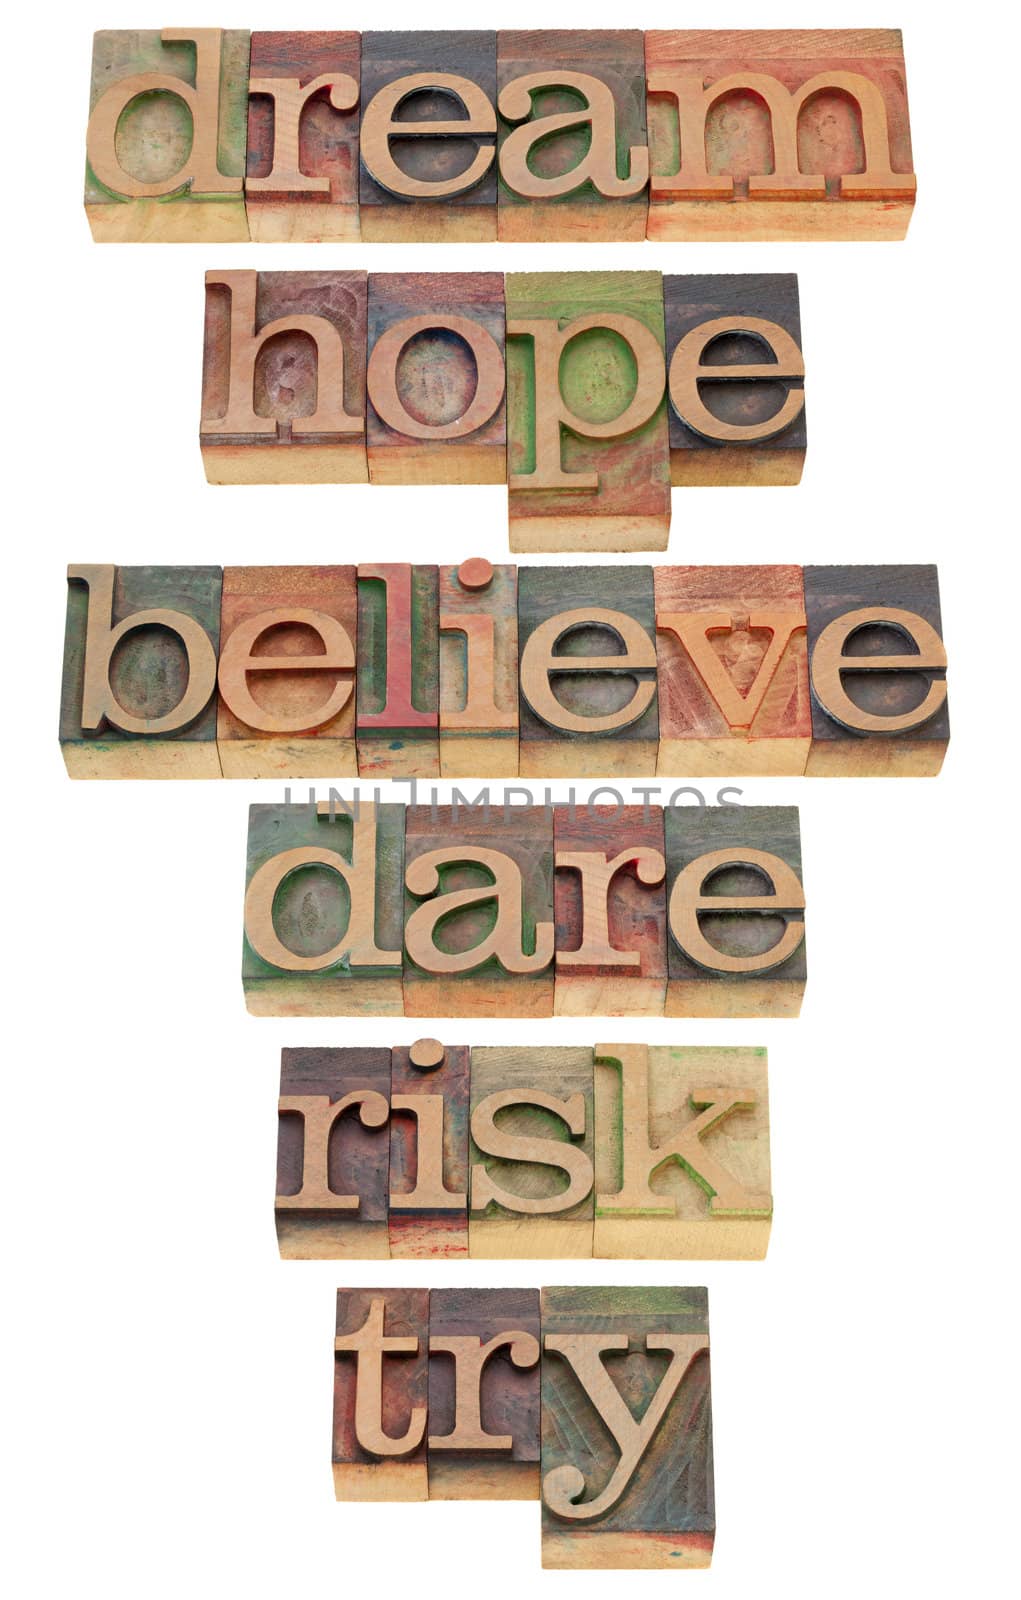 dream, hope, believe, dare, risk, try - a set of motivational and spiritual isolated words in vintage wood letterpress printing blocks